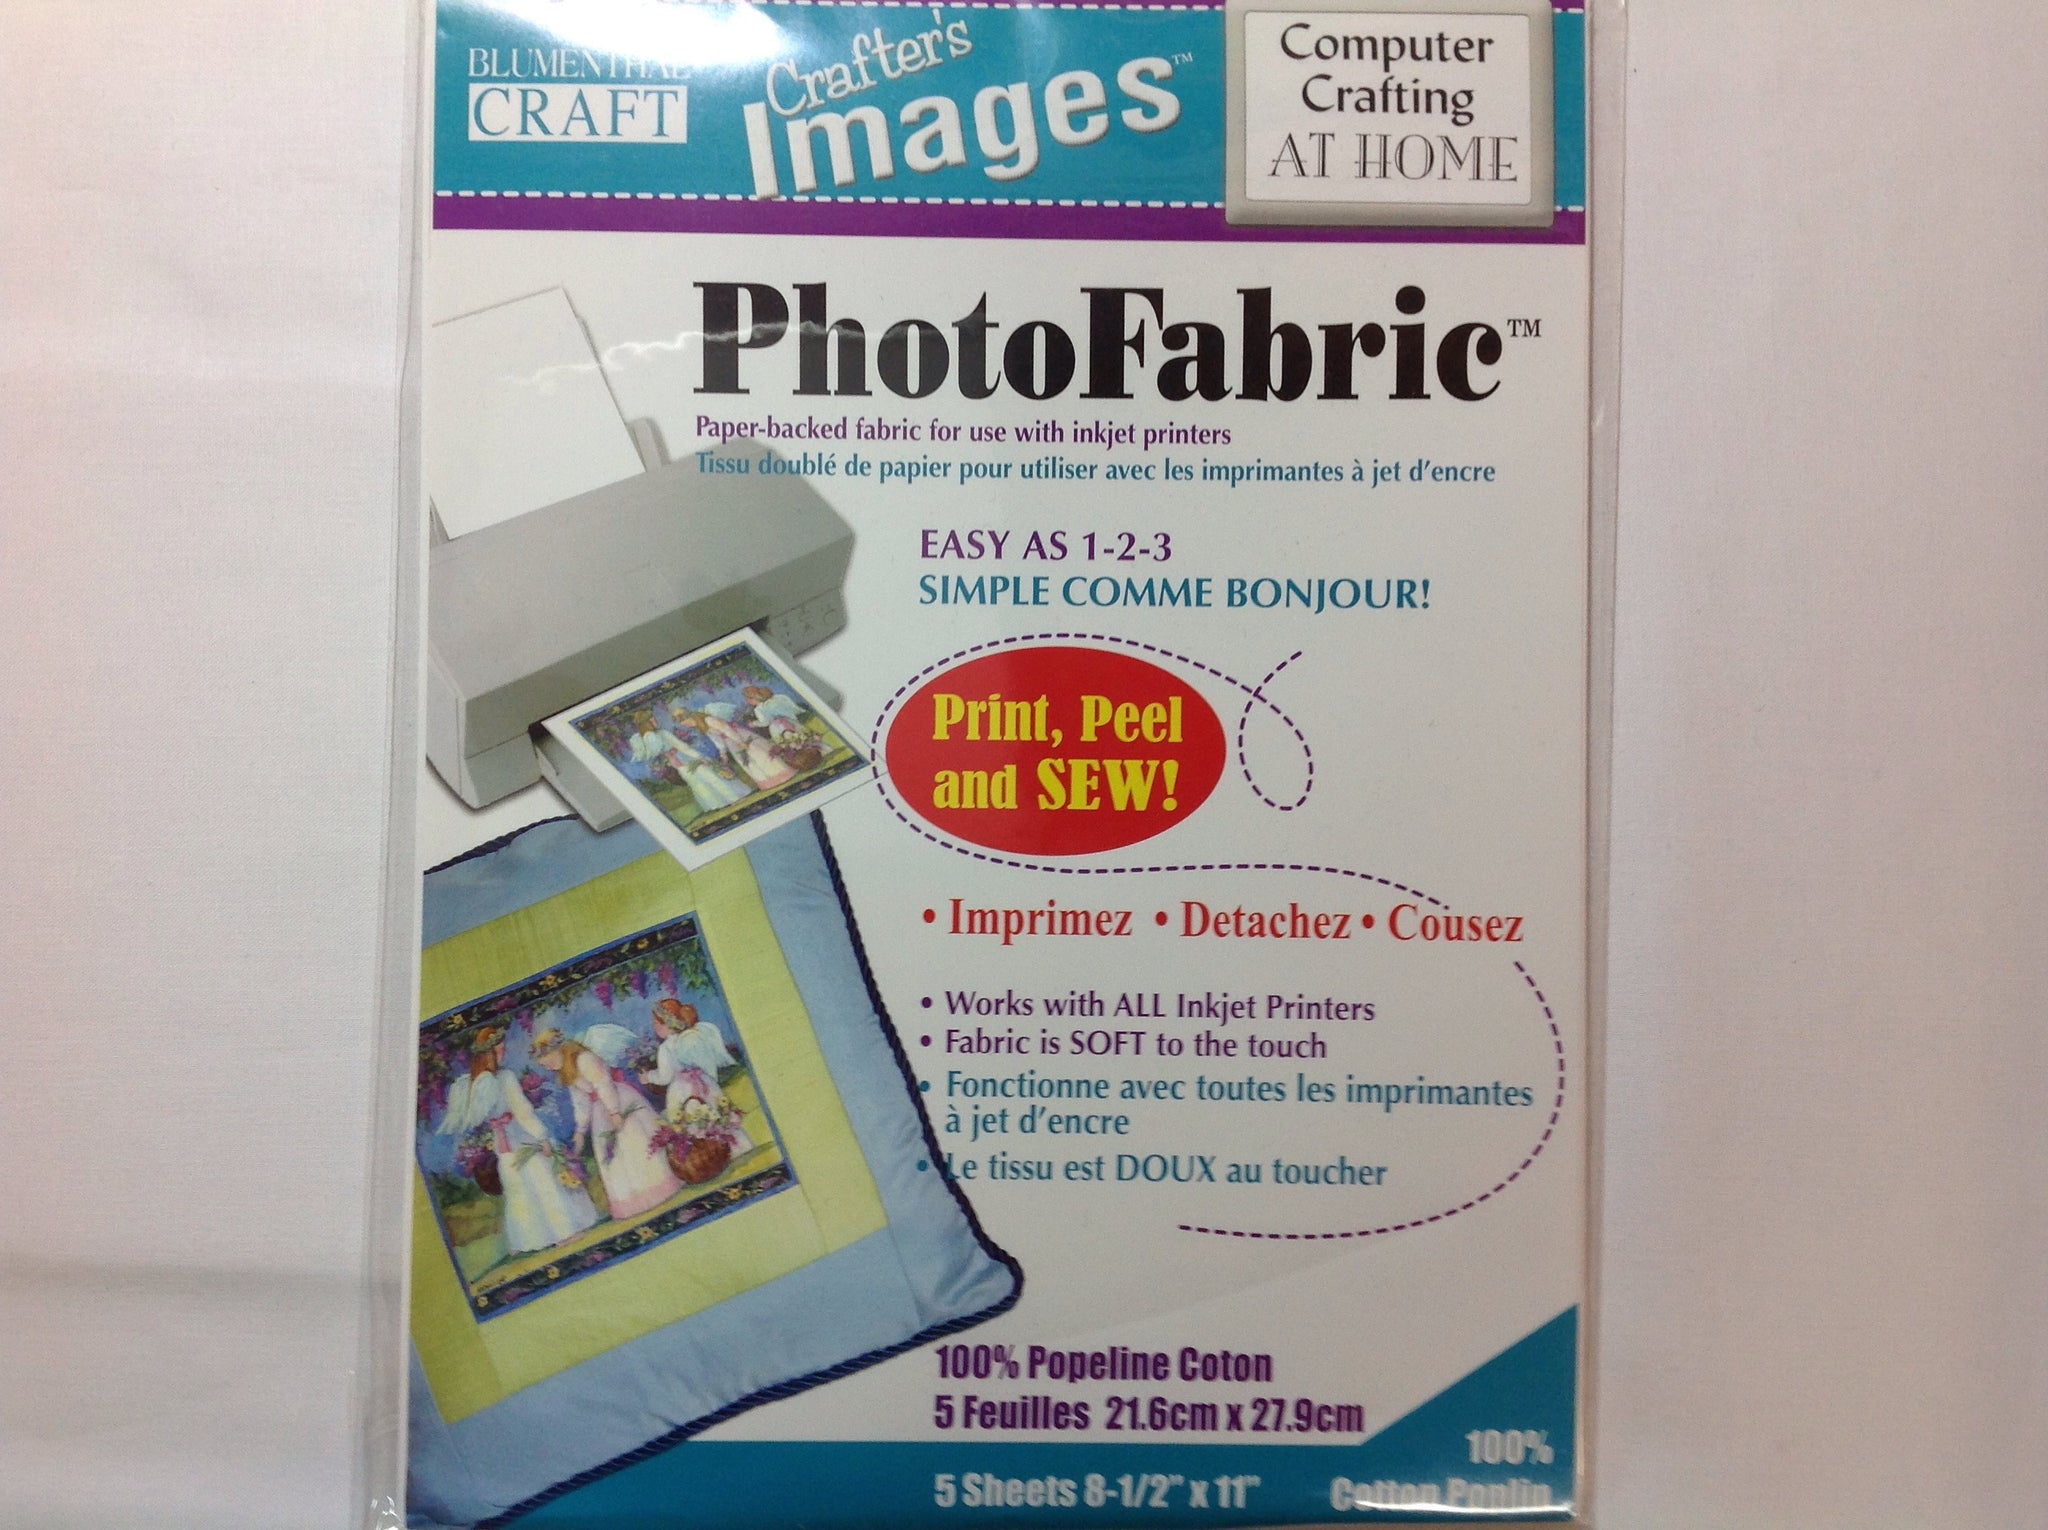 PhotoFabric - Crafters Images